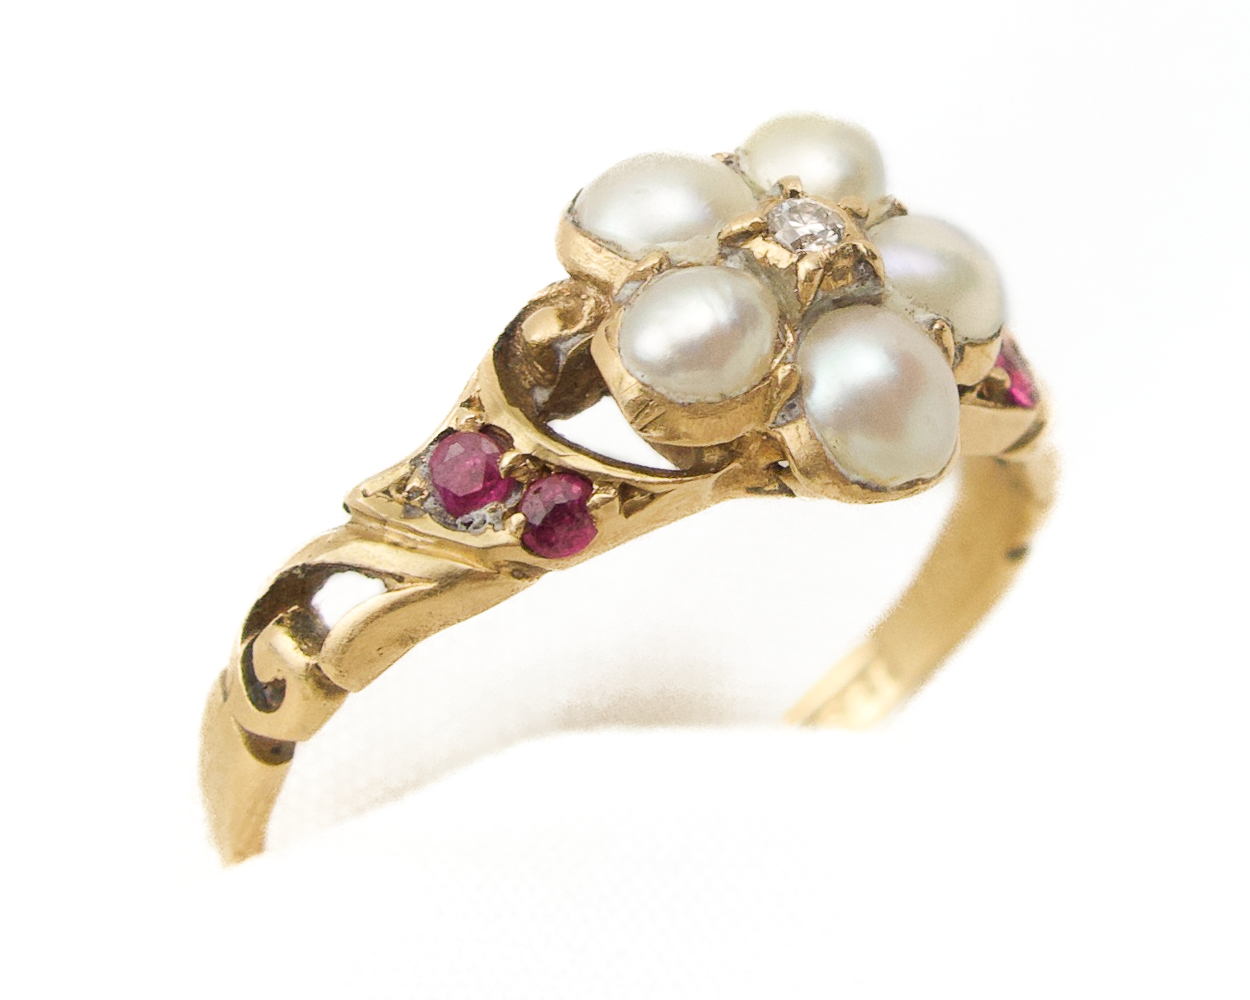 Edwardian 18ct Yellow Gold Seed Pearl Dress Ring - LA212781 |  LoveAntiques.com